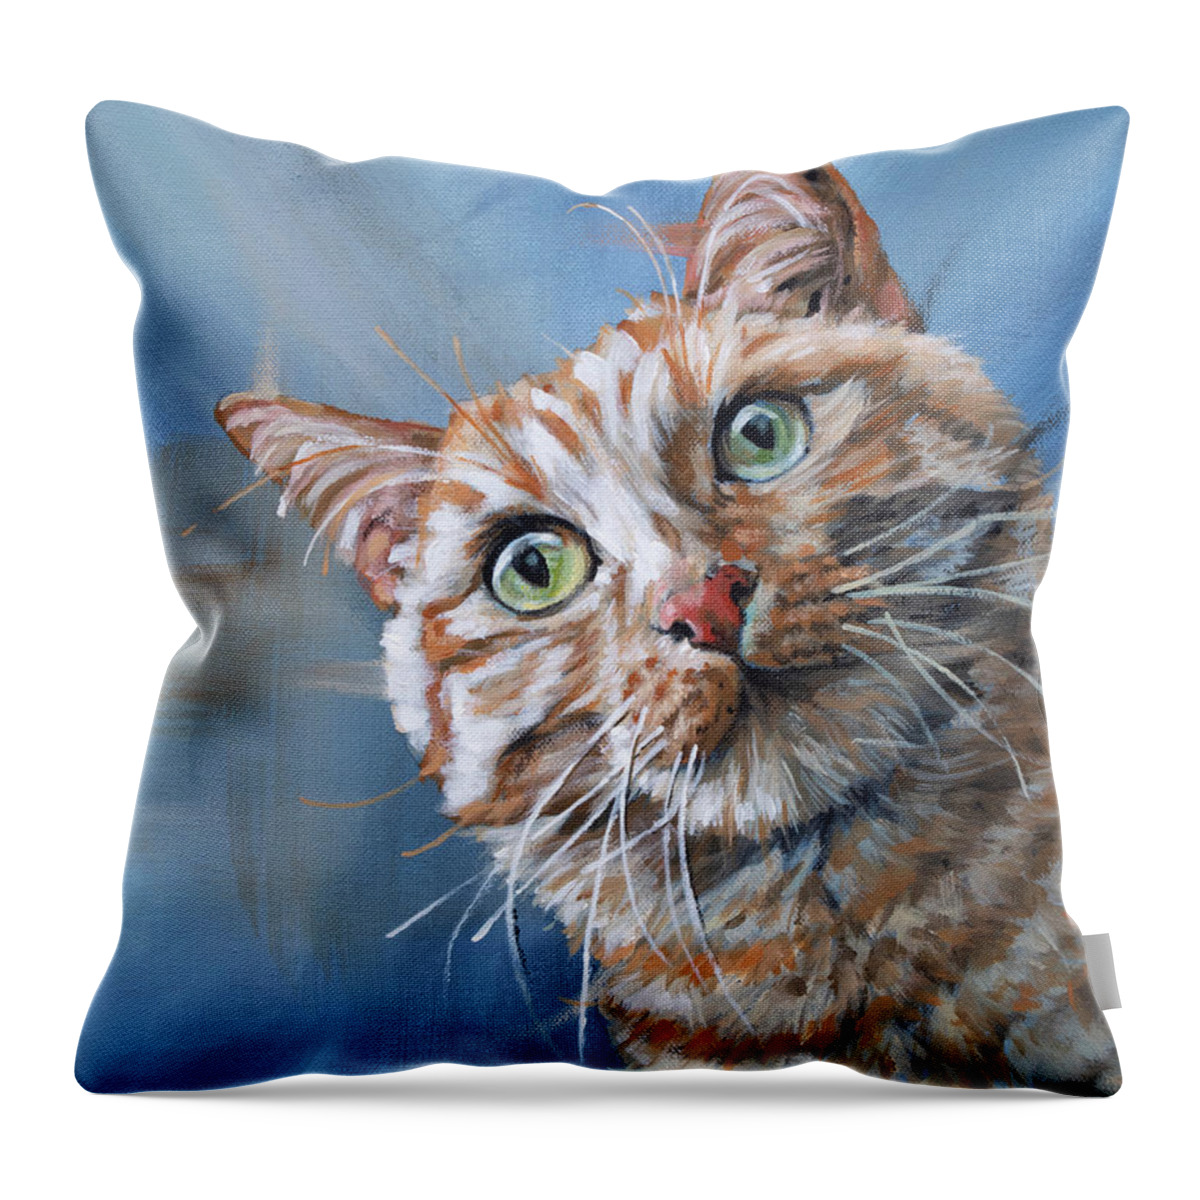 Cat Throw Pillow featuring the painting Tuna Time - Orange Cat Painting on Blue by Annie Troe